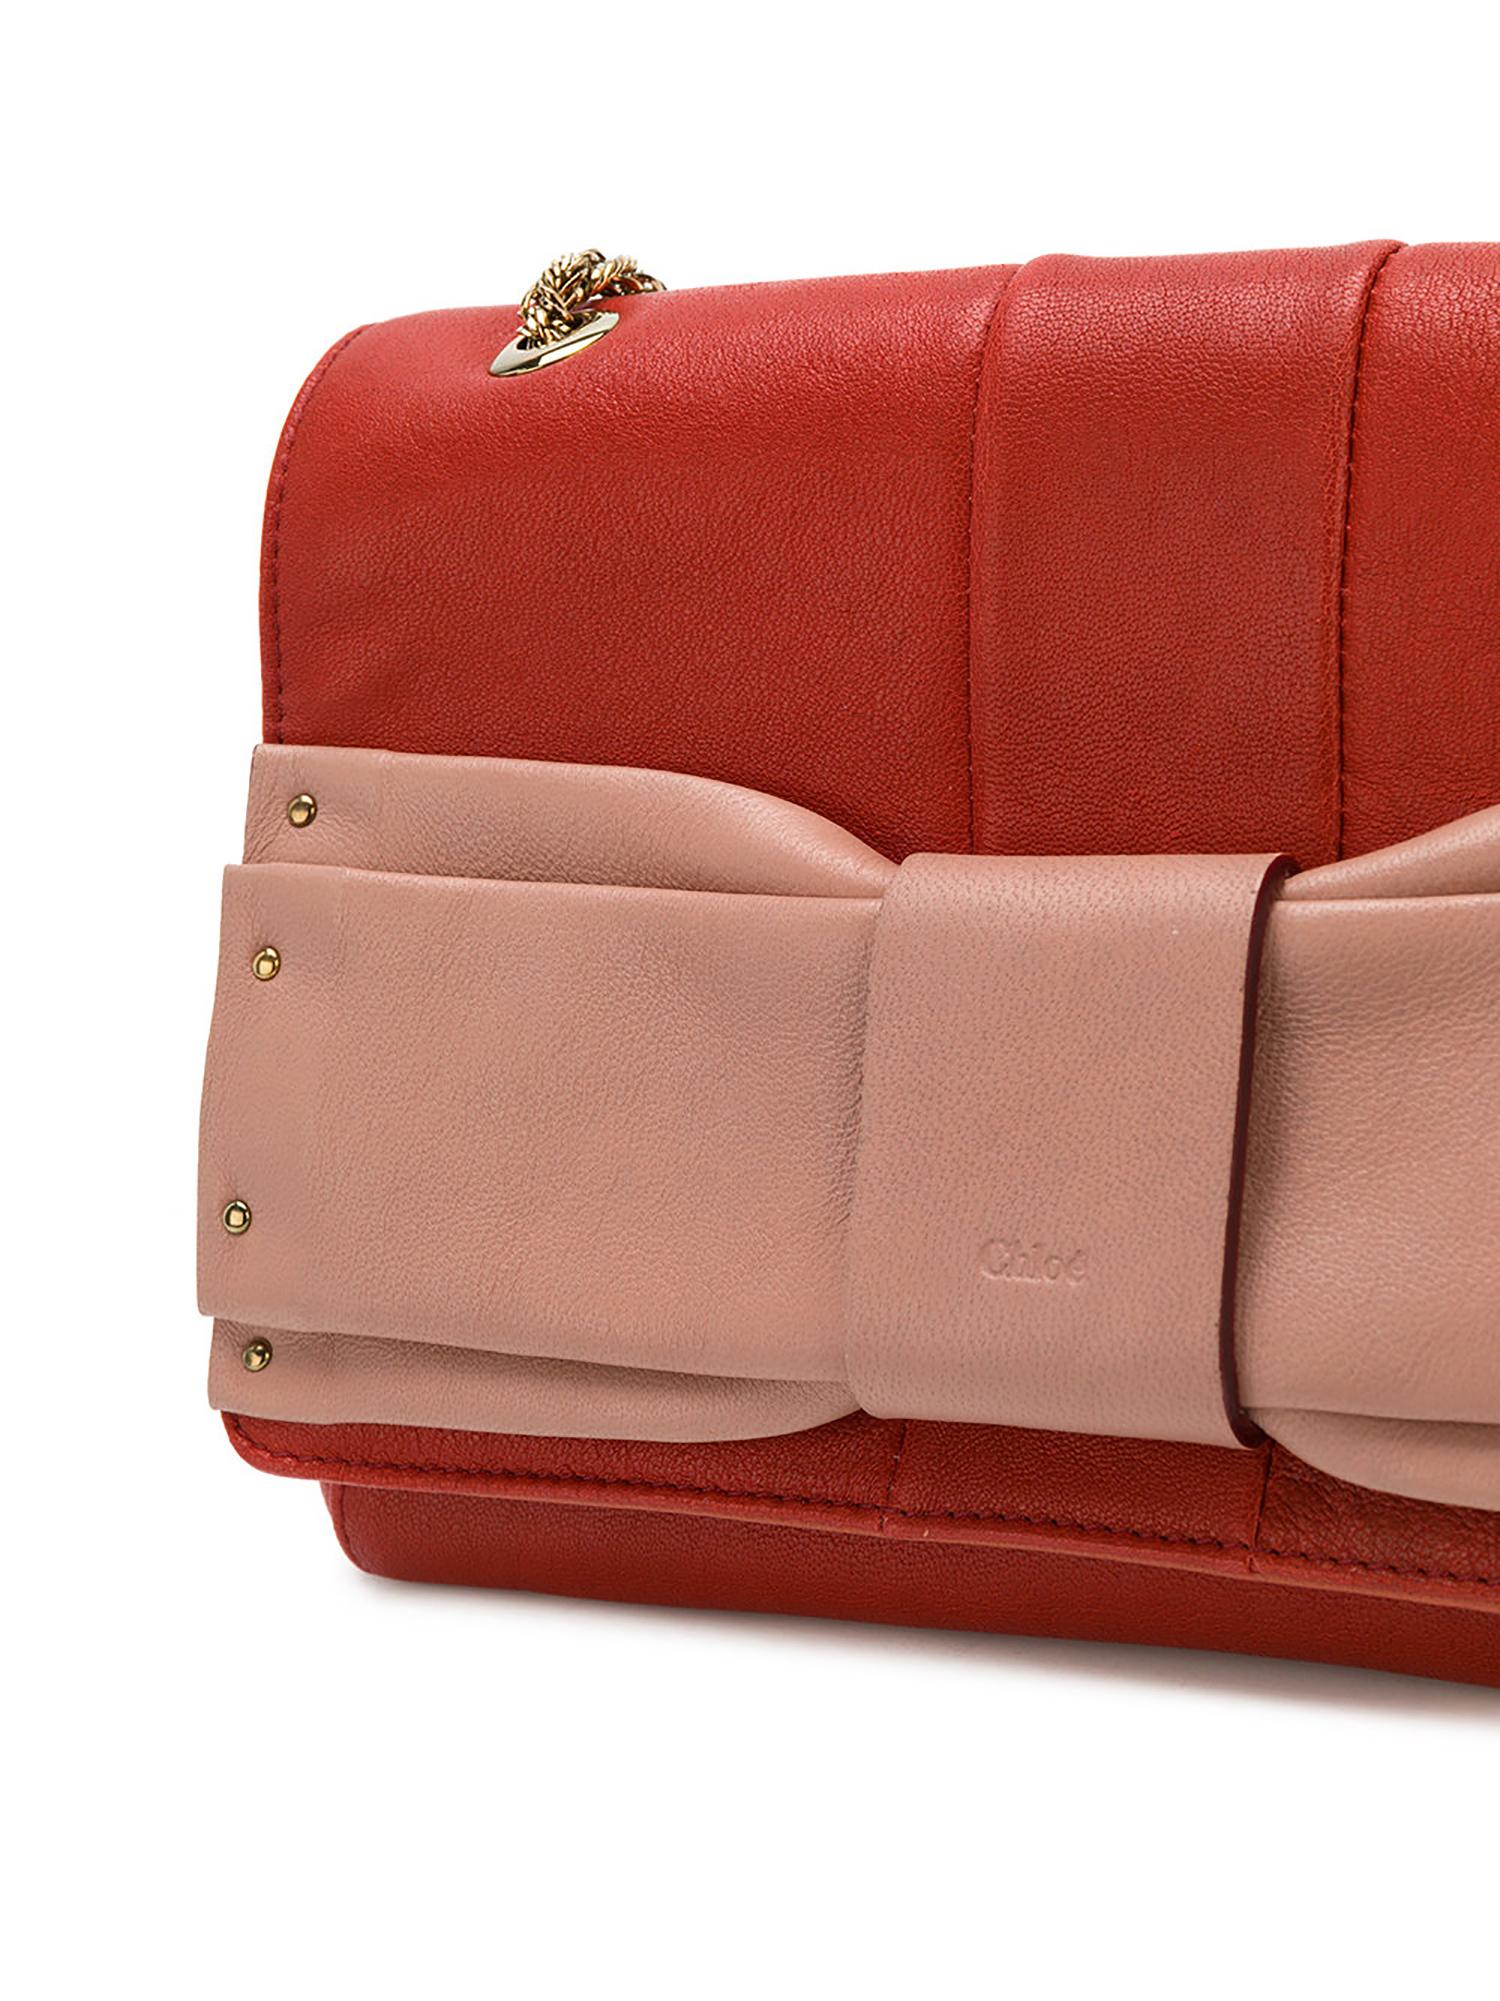 Exhibiting the playful femininity known to the Parisian brand, this Chloé June shoulder bag is crafted from leather, all finished with a logo-embossed bow. Red and pink are offset with gold-tone hardware, including a chain shoulder strap. The cream